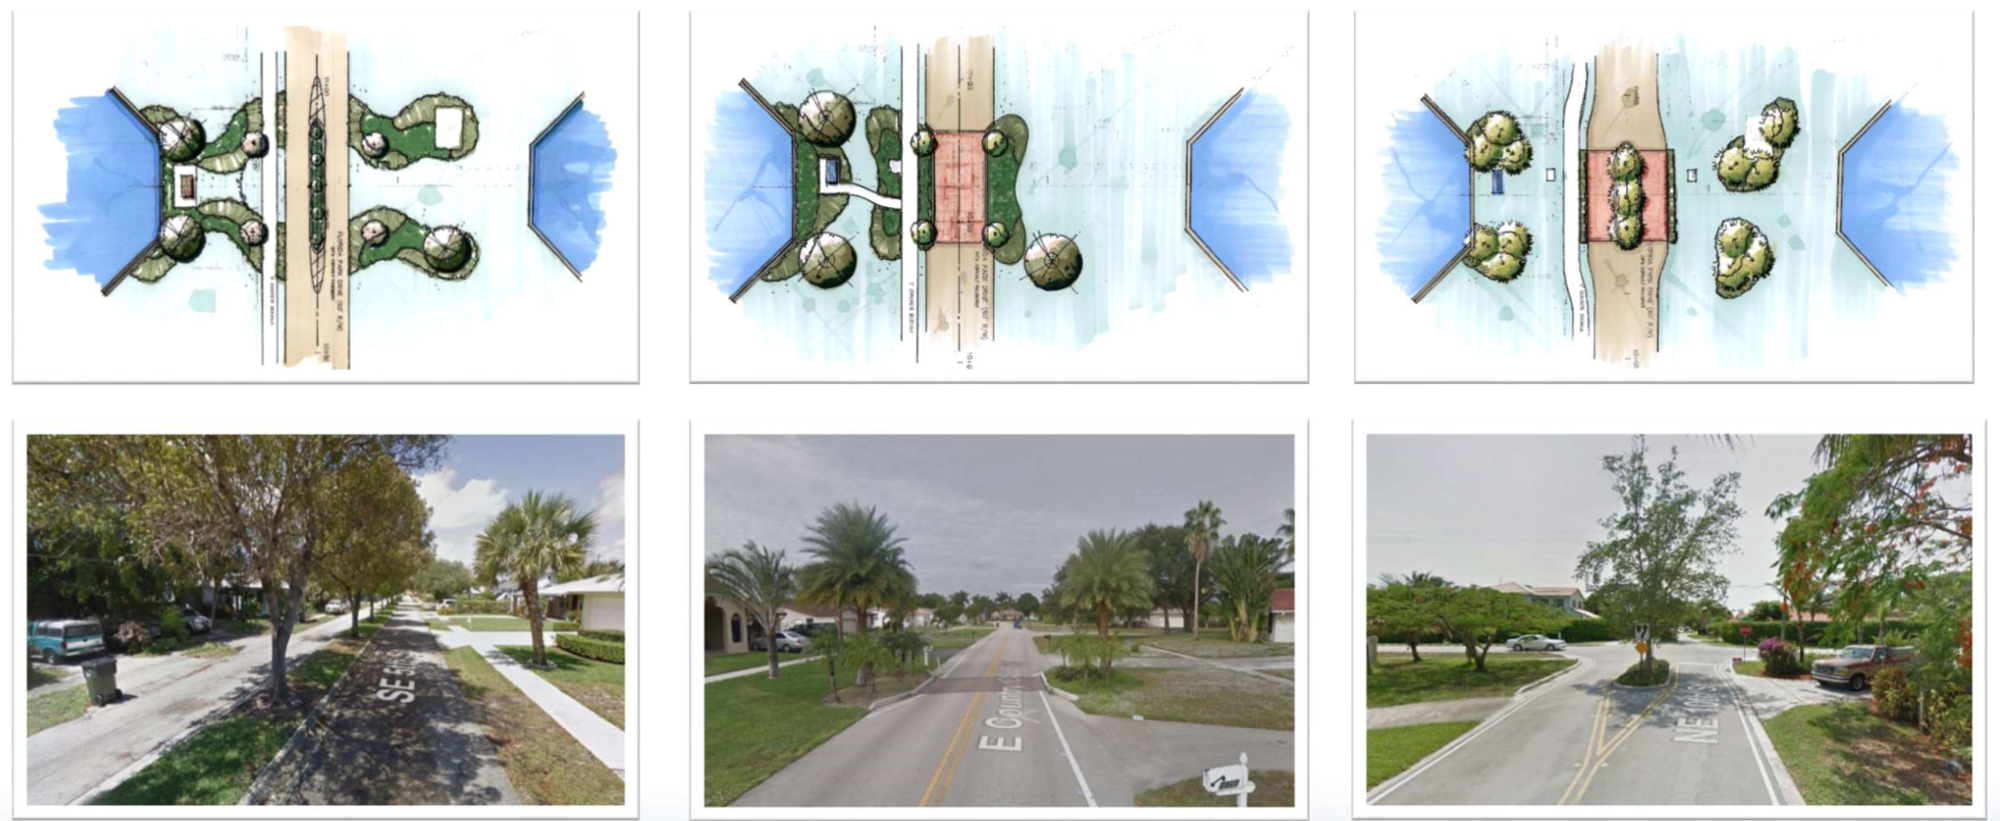 Some Florida Park Drive landscaping options. Image courtesy of the city of Palm Coast